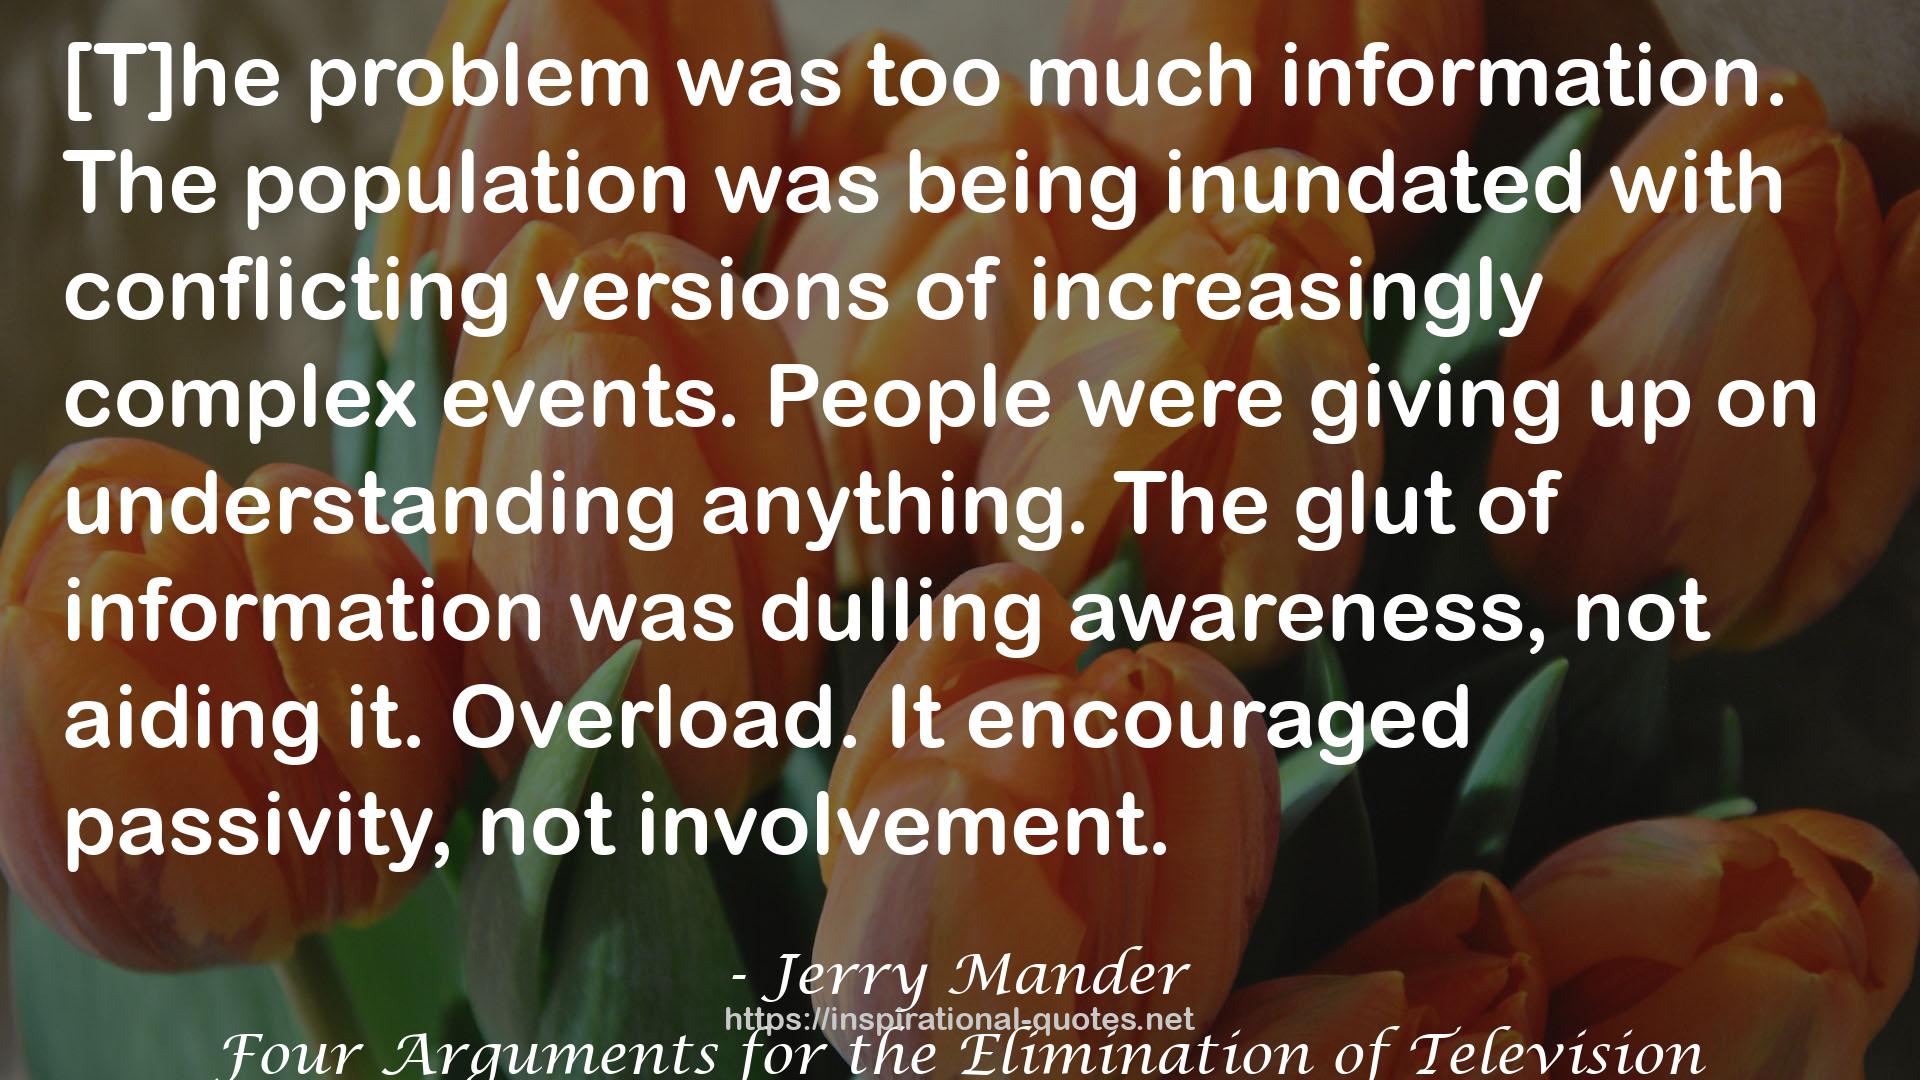 Jerry Mander QUOTES